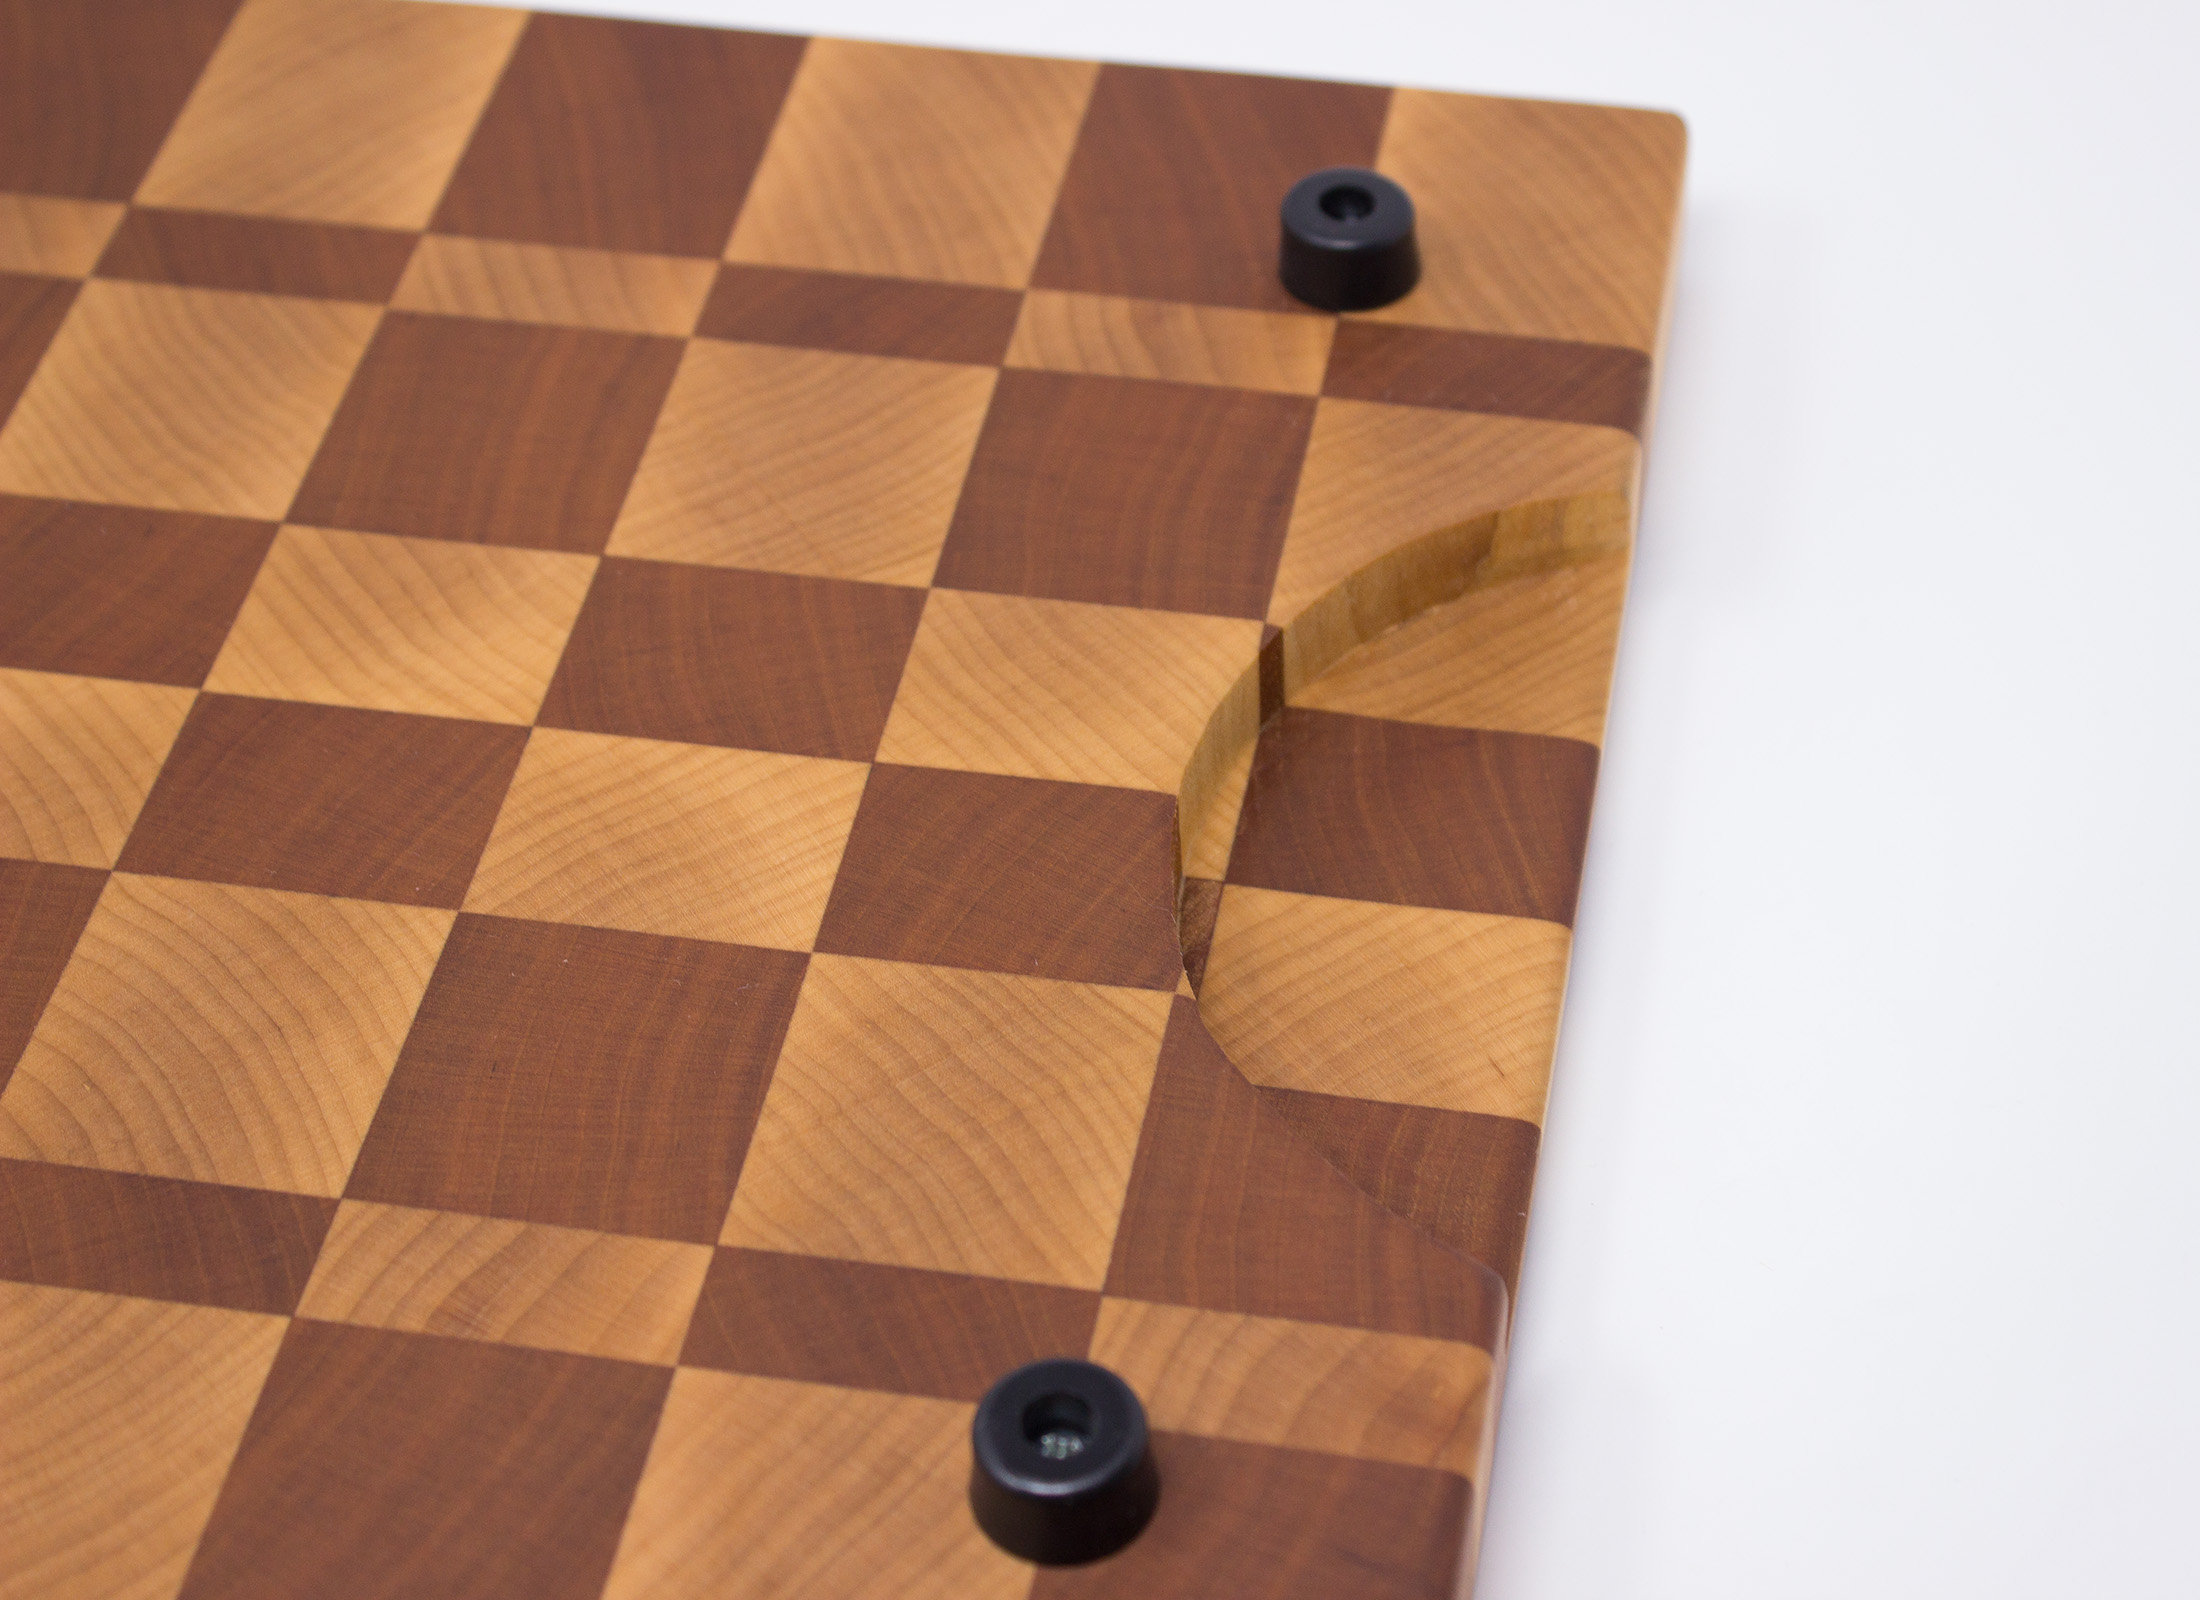 https://www.rockfordwoodcrafts.com/wp-content/uploads/Maple-and-Cherry-Checkerboard-End-Grain-Cutting-Board-Backside-Handle-Closeup.jpg